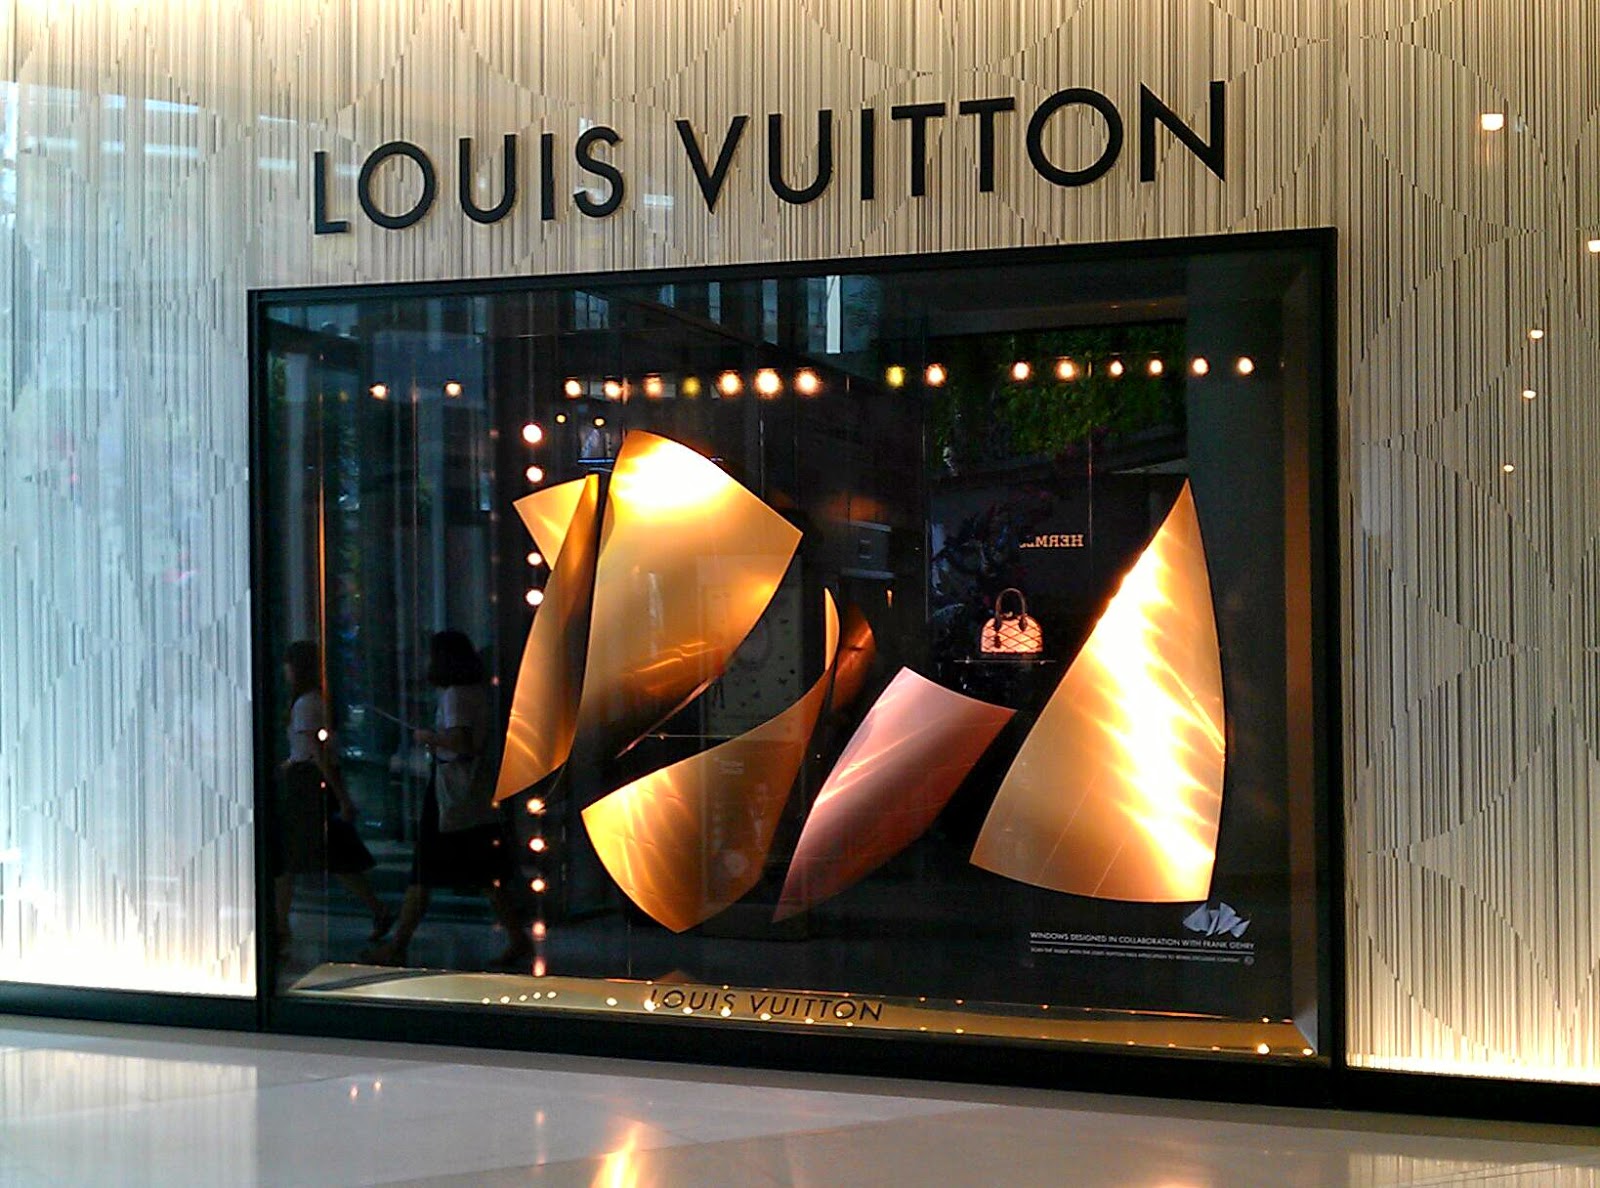 Louis Vuitton Shop At Siam Paragon, Bangkok, Thailand, May 9, 2018 : Luxury  And Fashionable Brand Display. Fashionable Leather Bag Window Display.  Stock Photo, Picture and Royalty Free Image. Image 127943438.